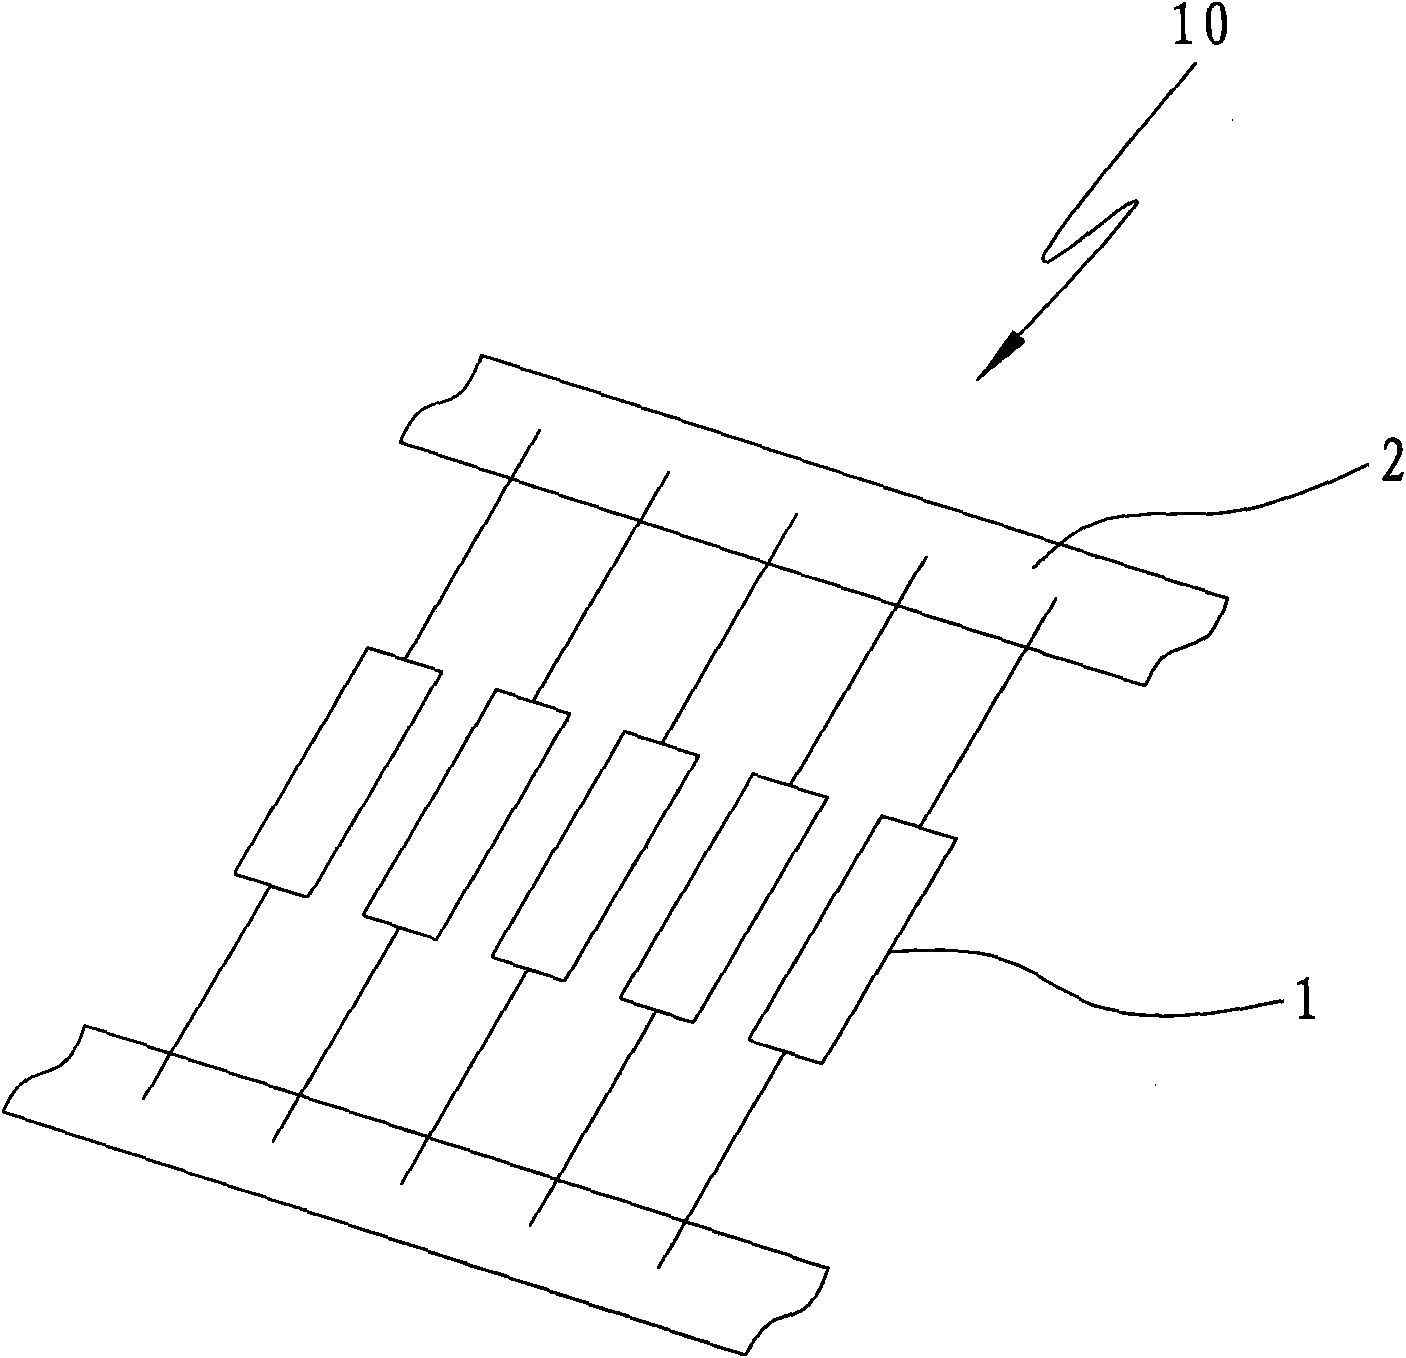 Process for producing low-power non-wire wound fixed resistors